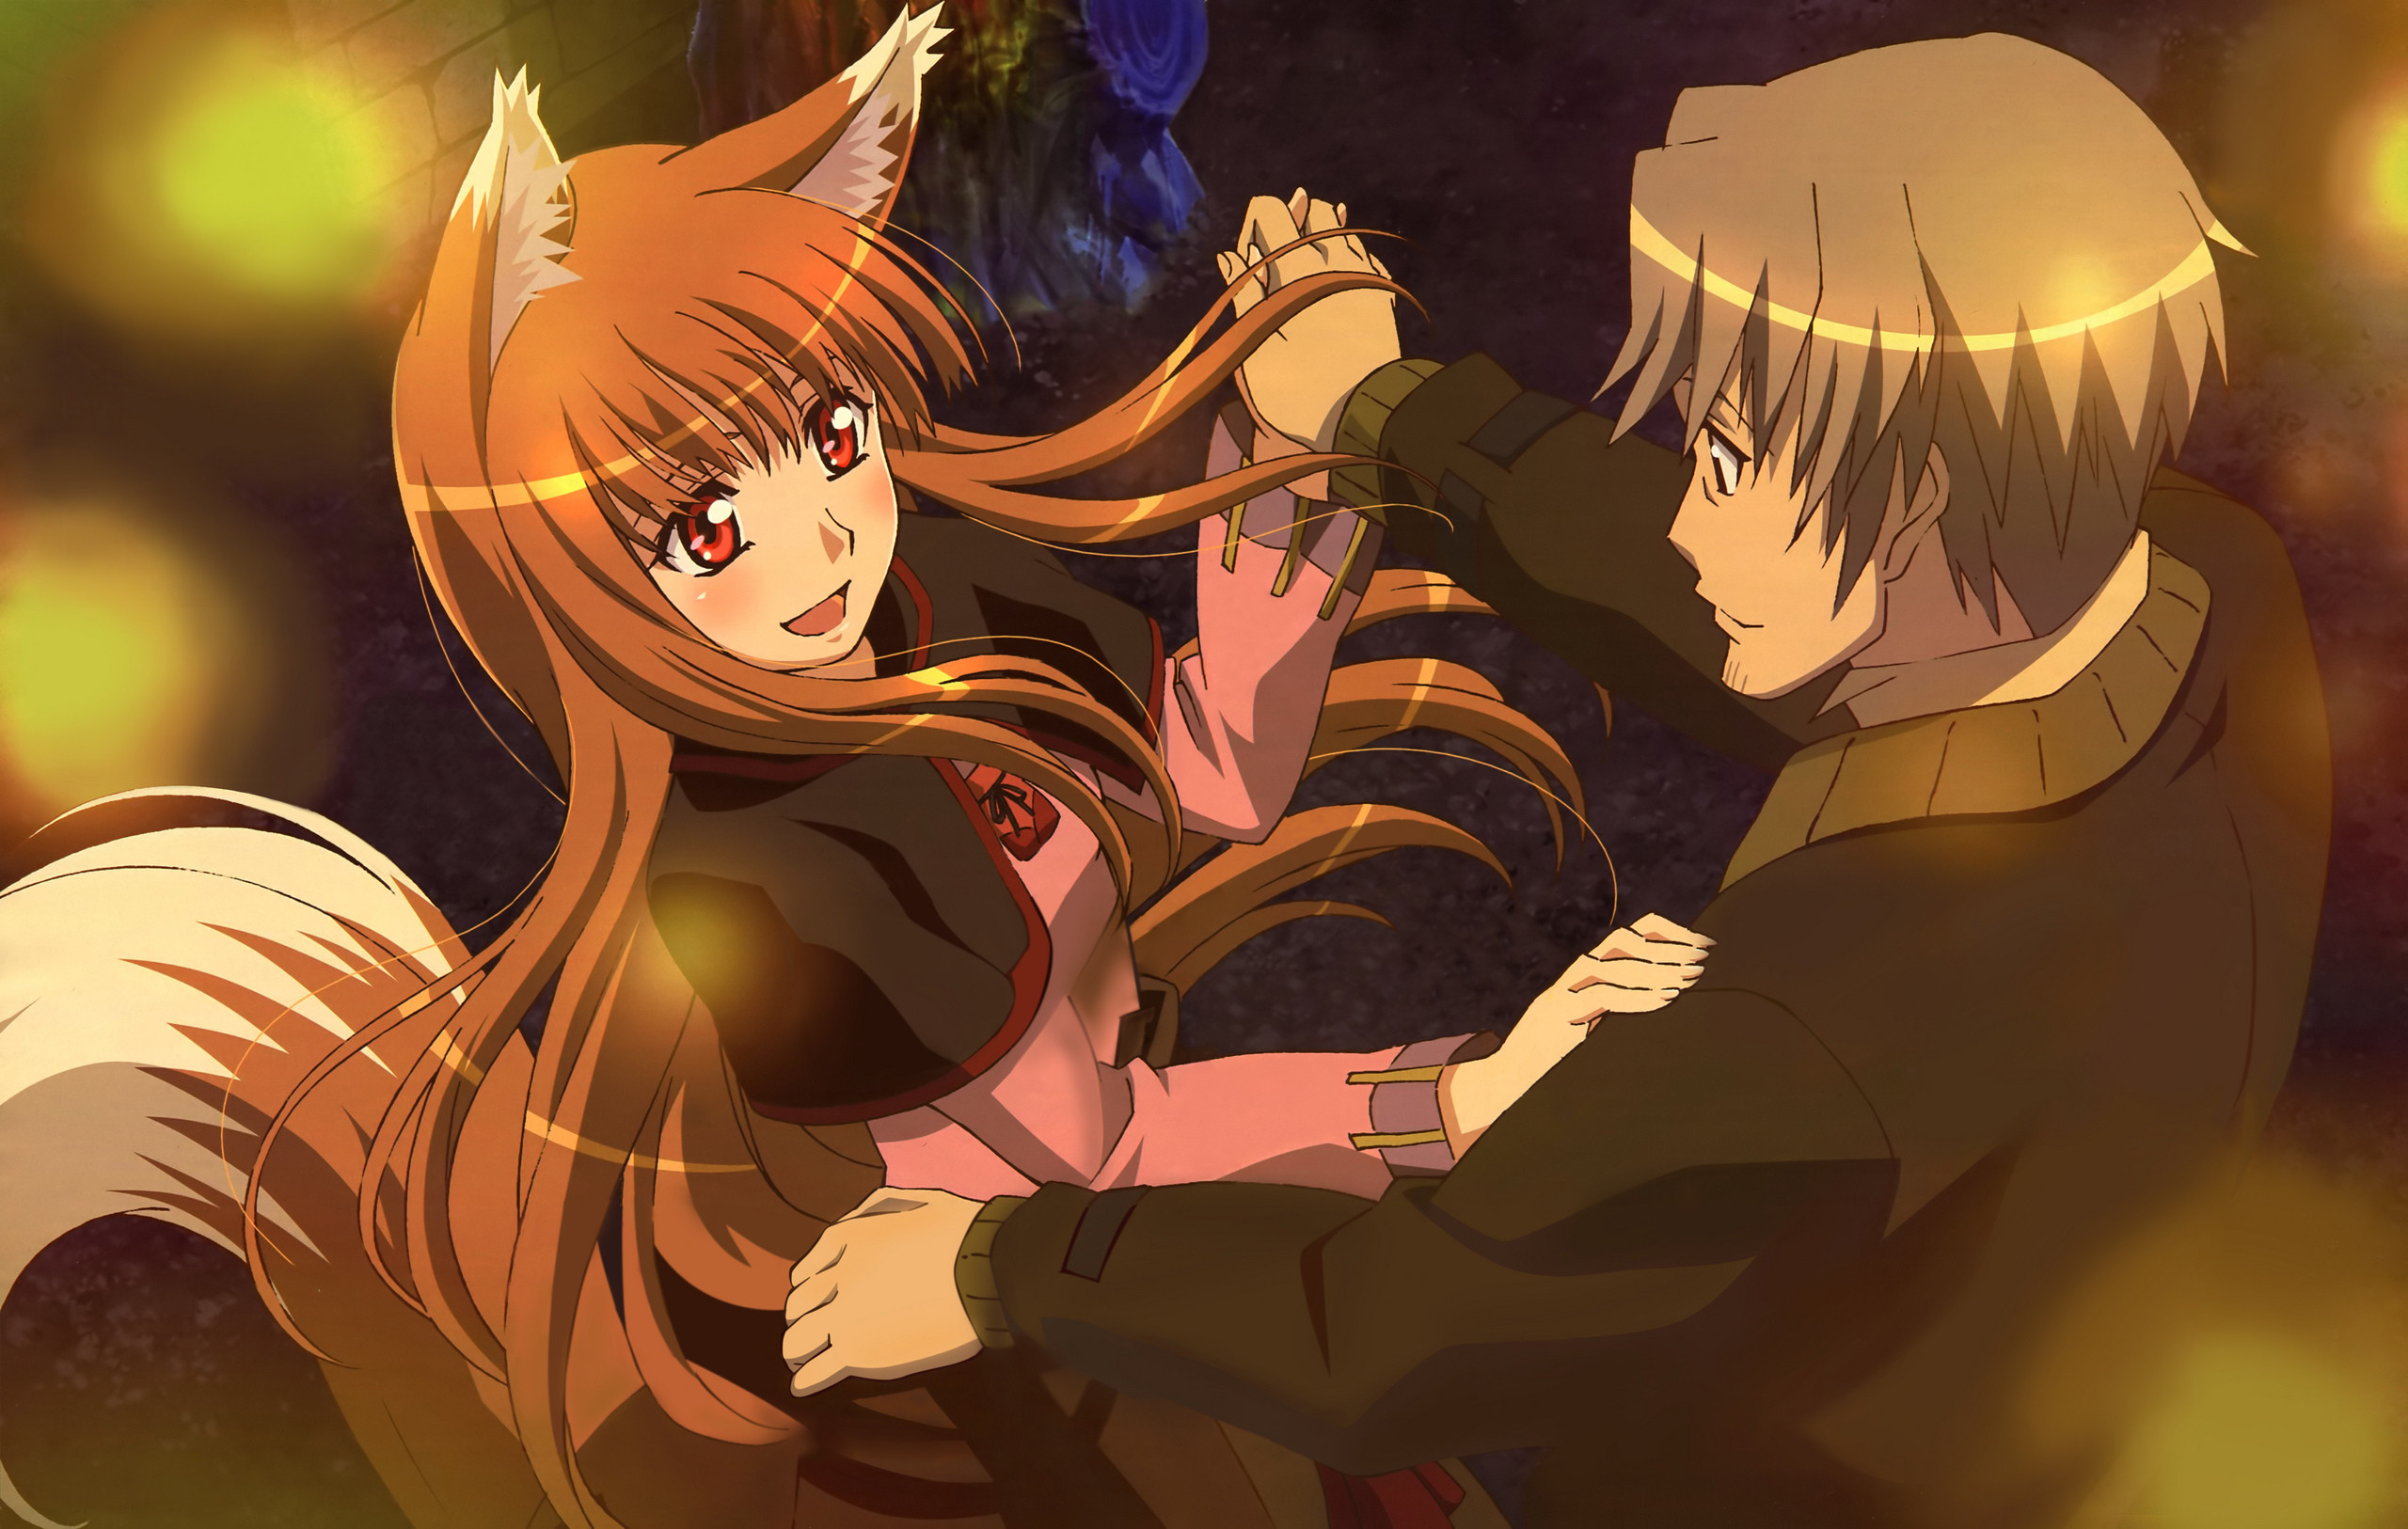 2560x1626 Spice and wolf images lawrence and holo dancing 2gether HD wallpaper and  background photos